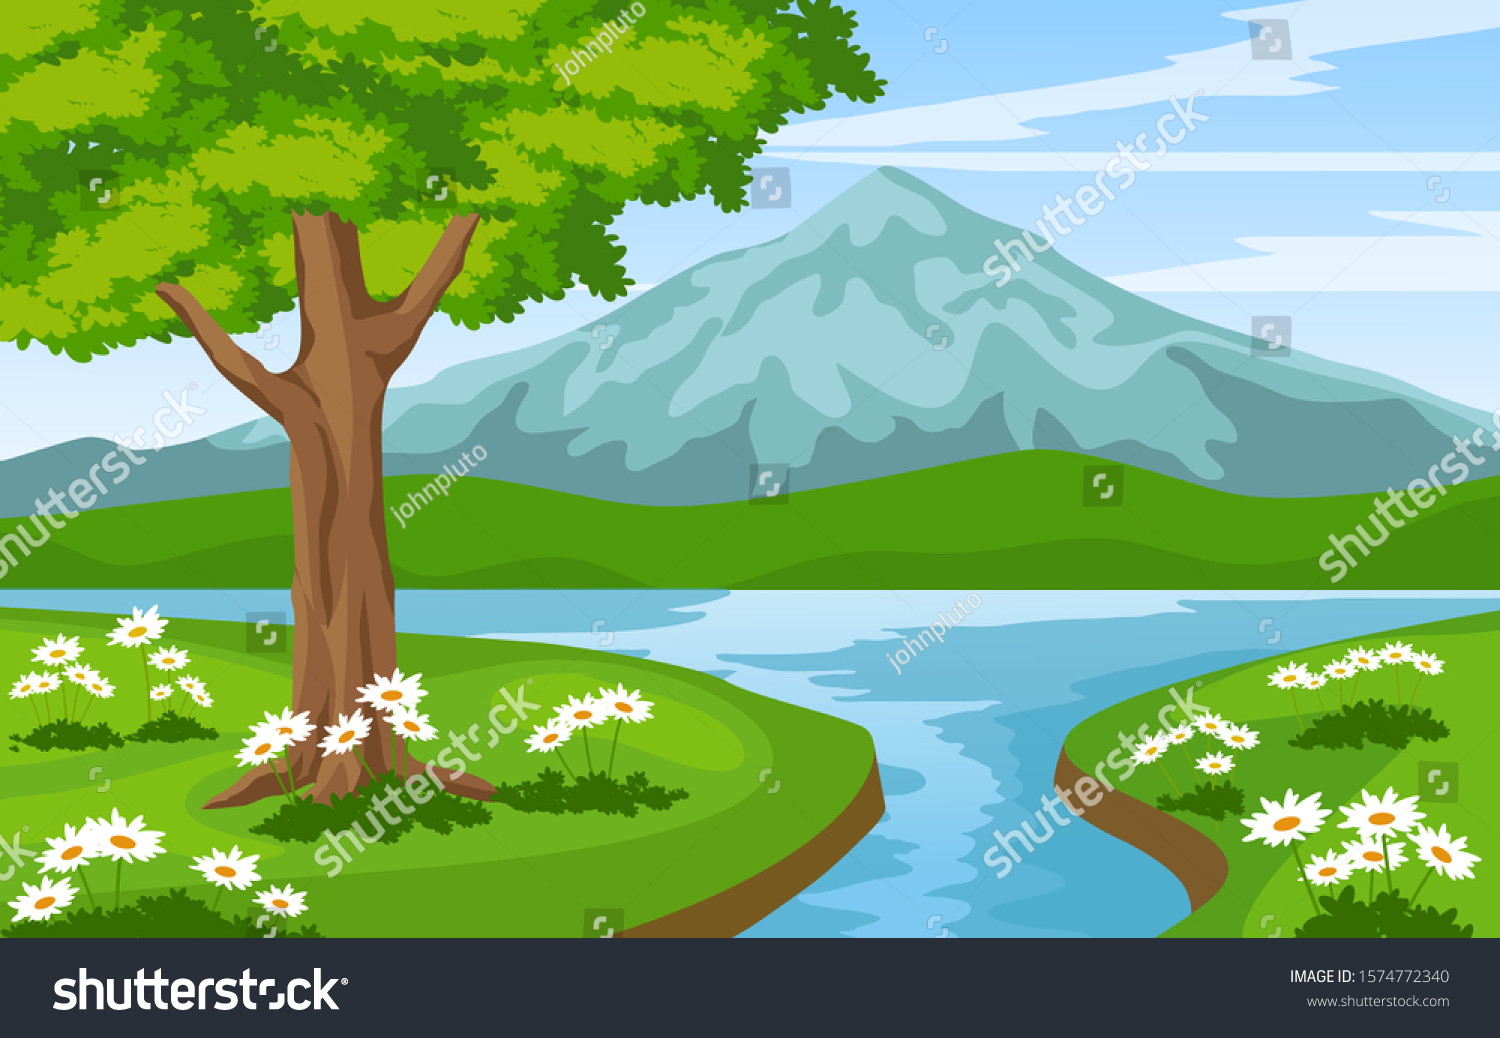 Simple Nature Mountain River Vector (Royalty Free) 1574772340